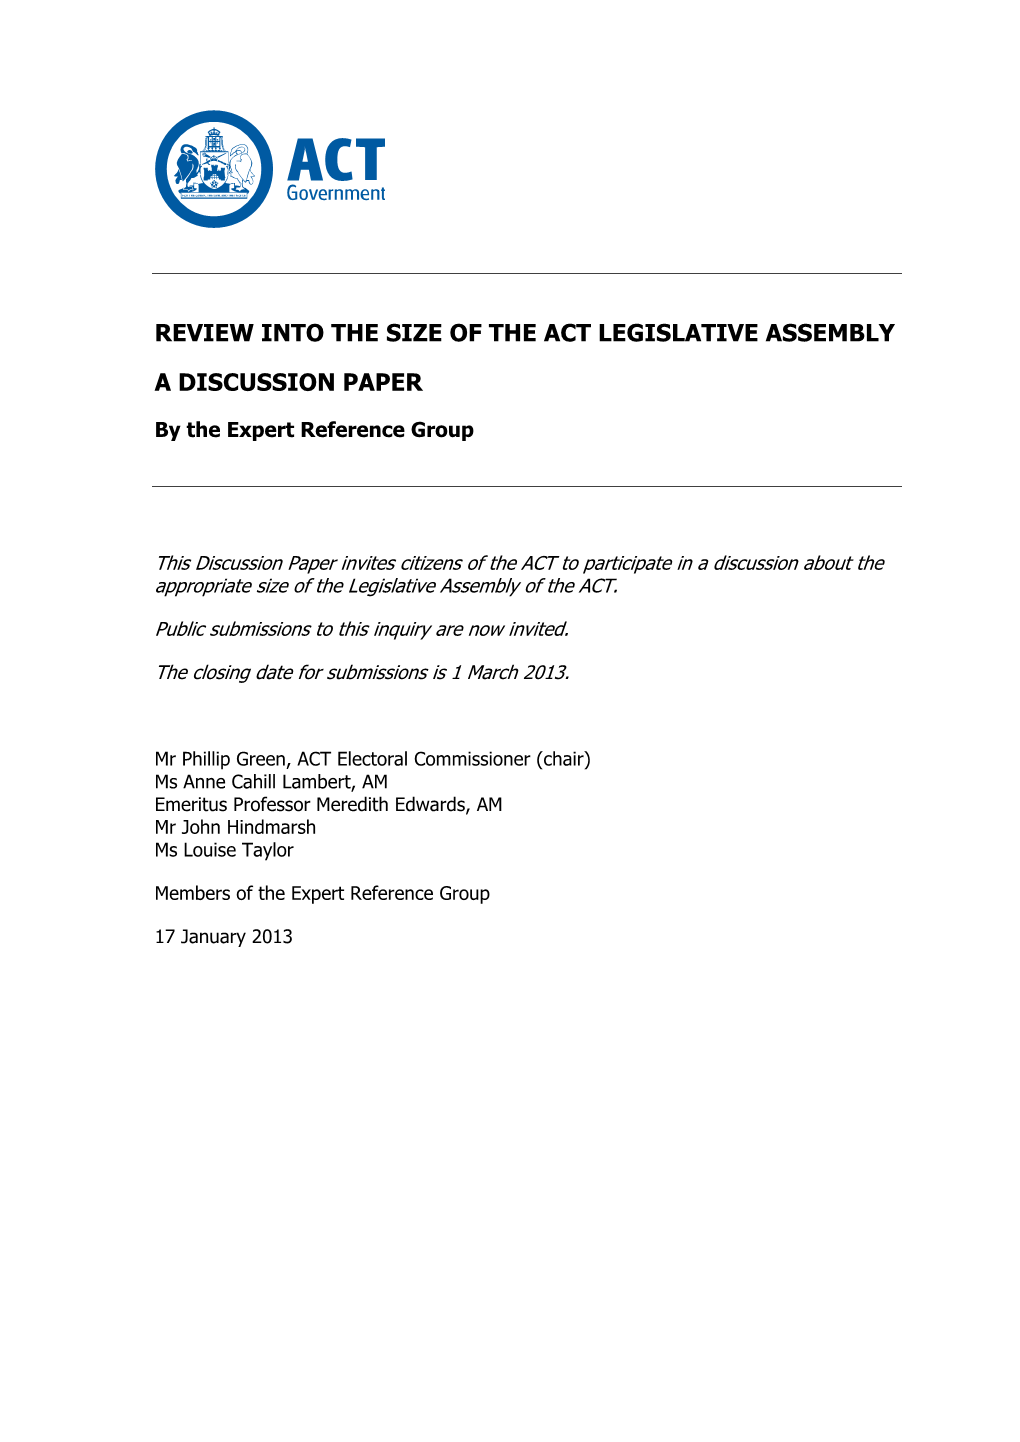 Assembly Size Discussion Paper 17 Jan 2013